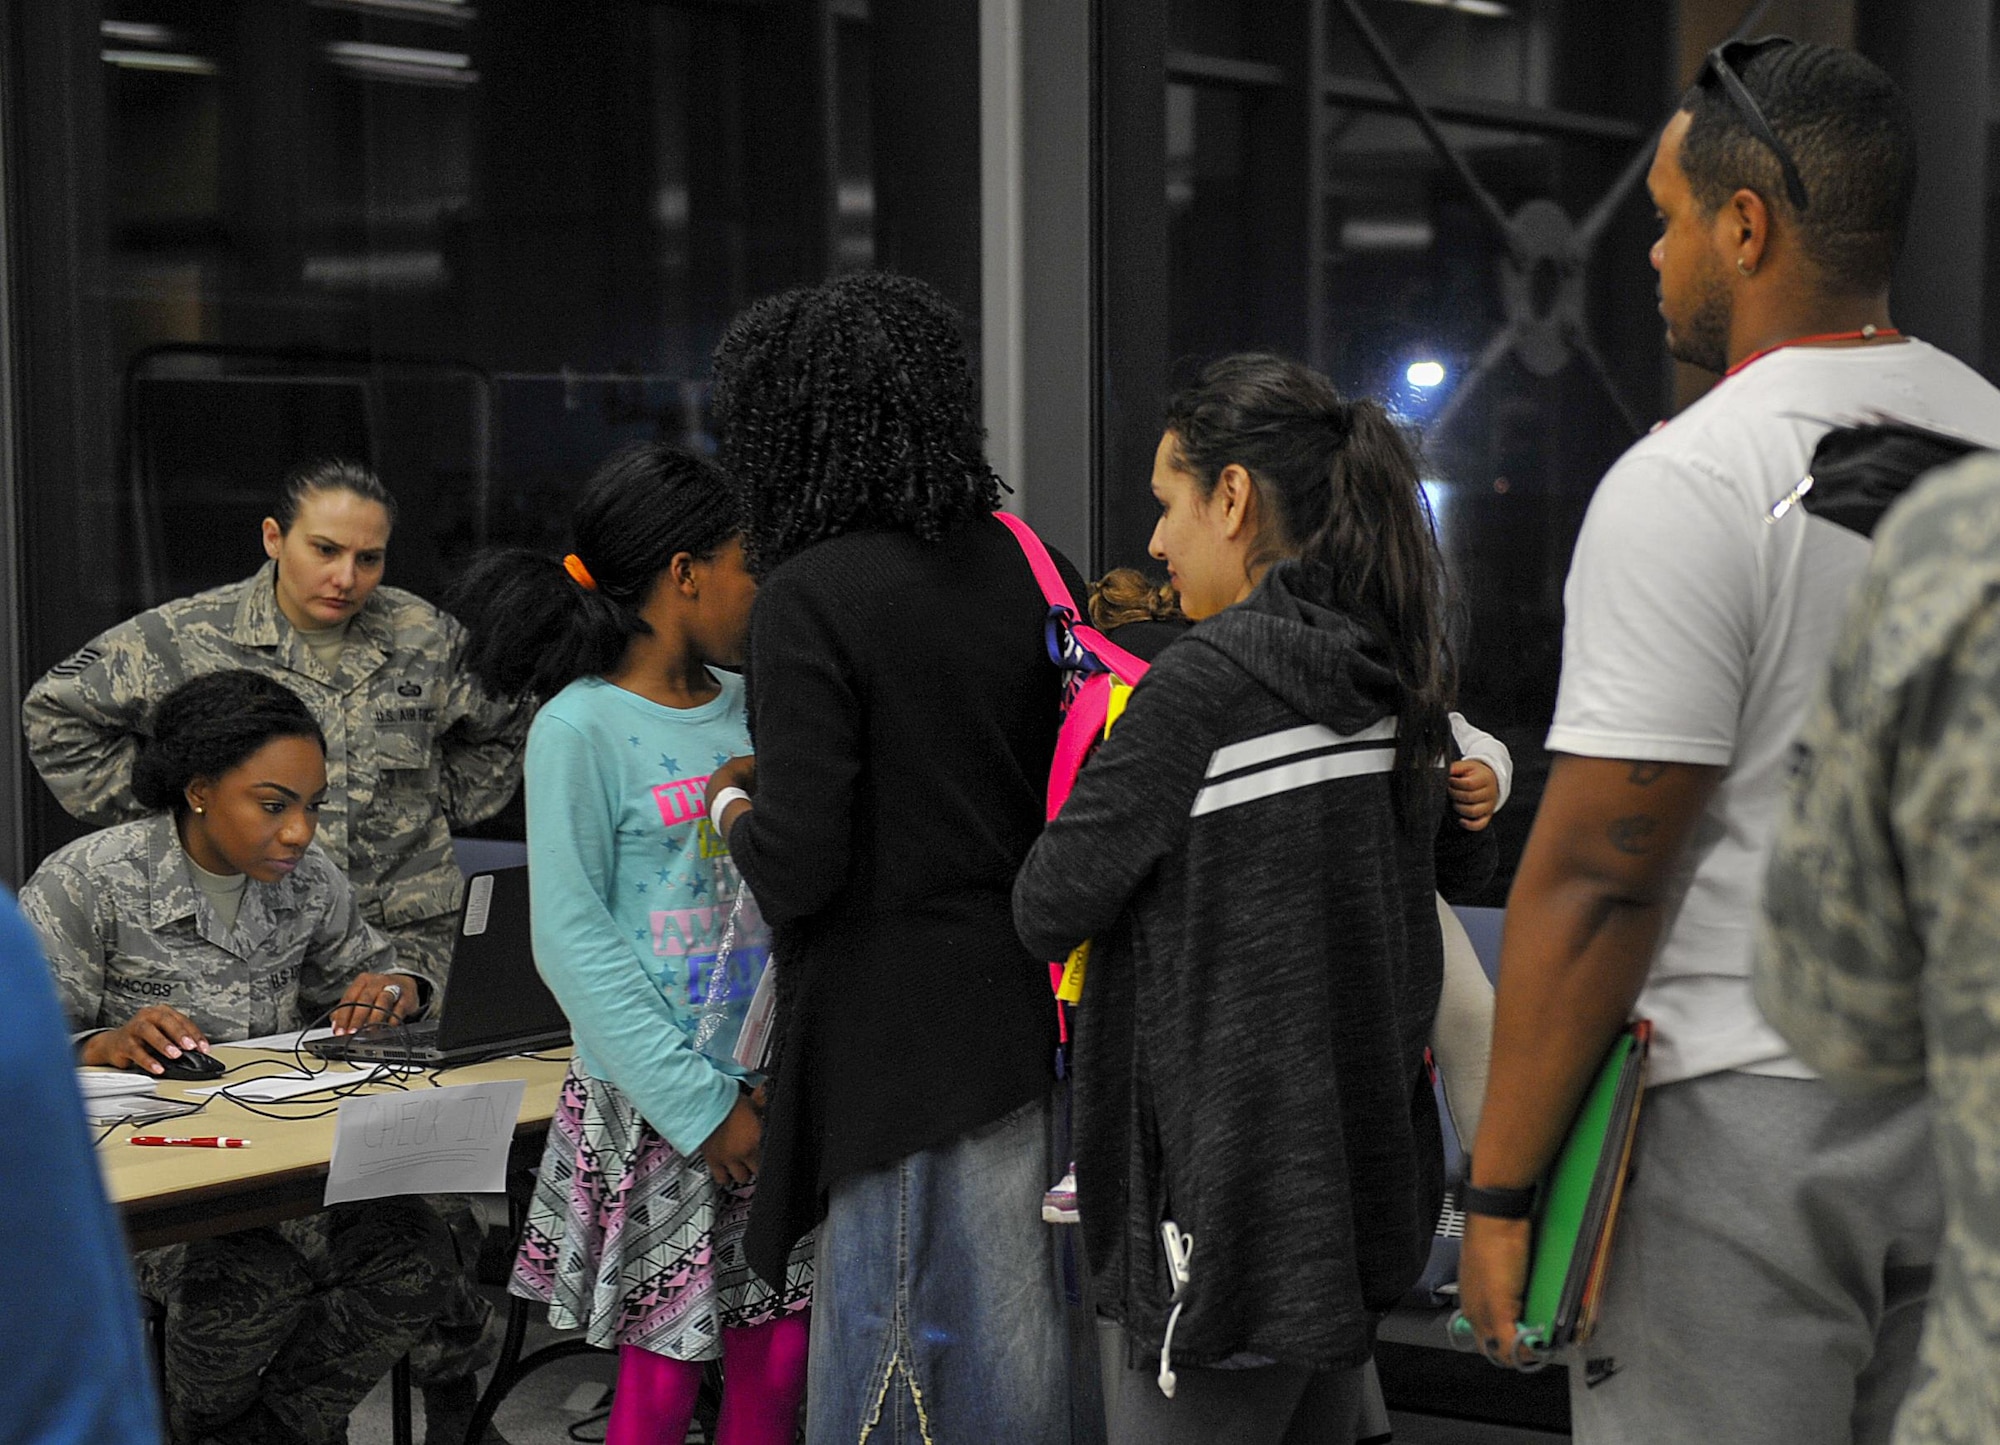 Families arriving from Turkey check-in March 31, 2016, at Ramstein Air Base, Germany. Many agencies provided assistance by offering food, transportation and any needs families arriving from military bases in Turkey may have required. (U.S. Air Force photo/Senior Airman Larissa Greatwood)